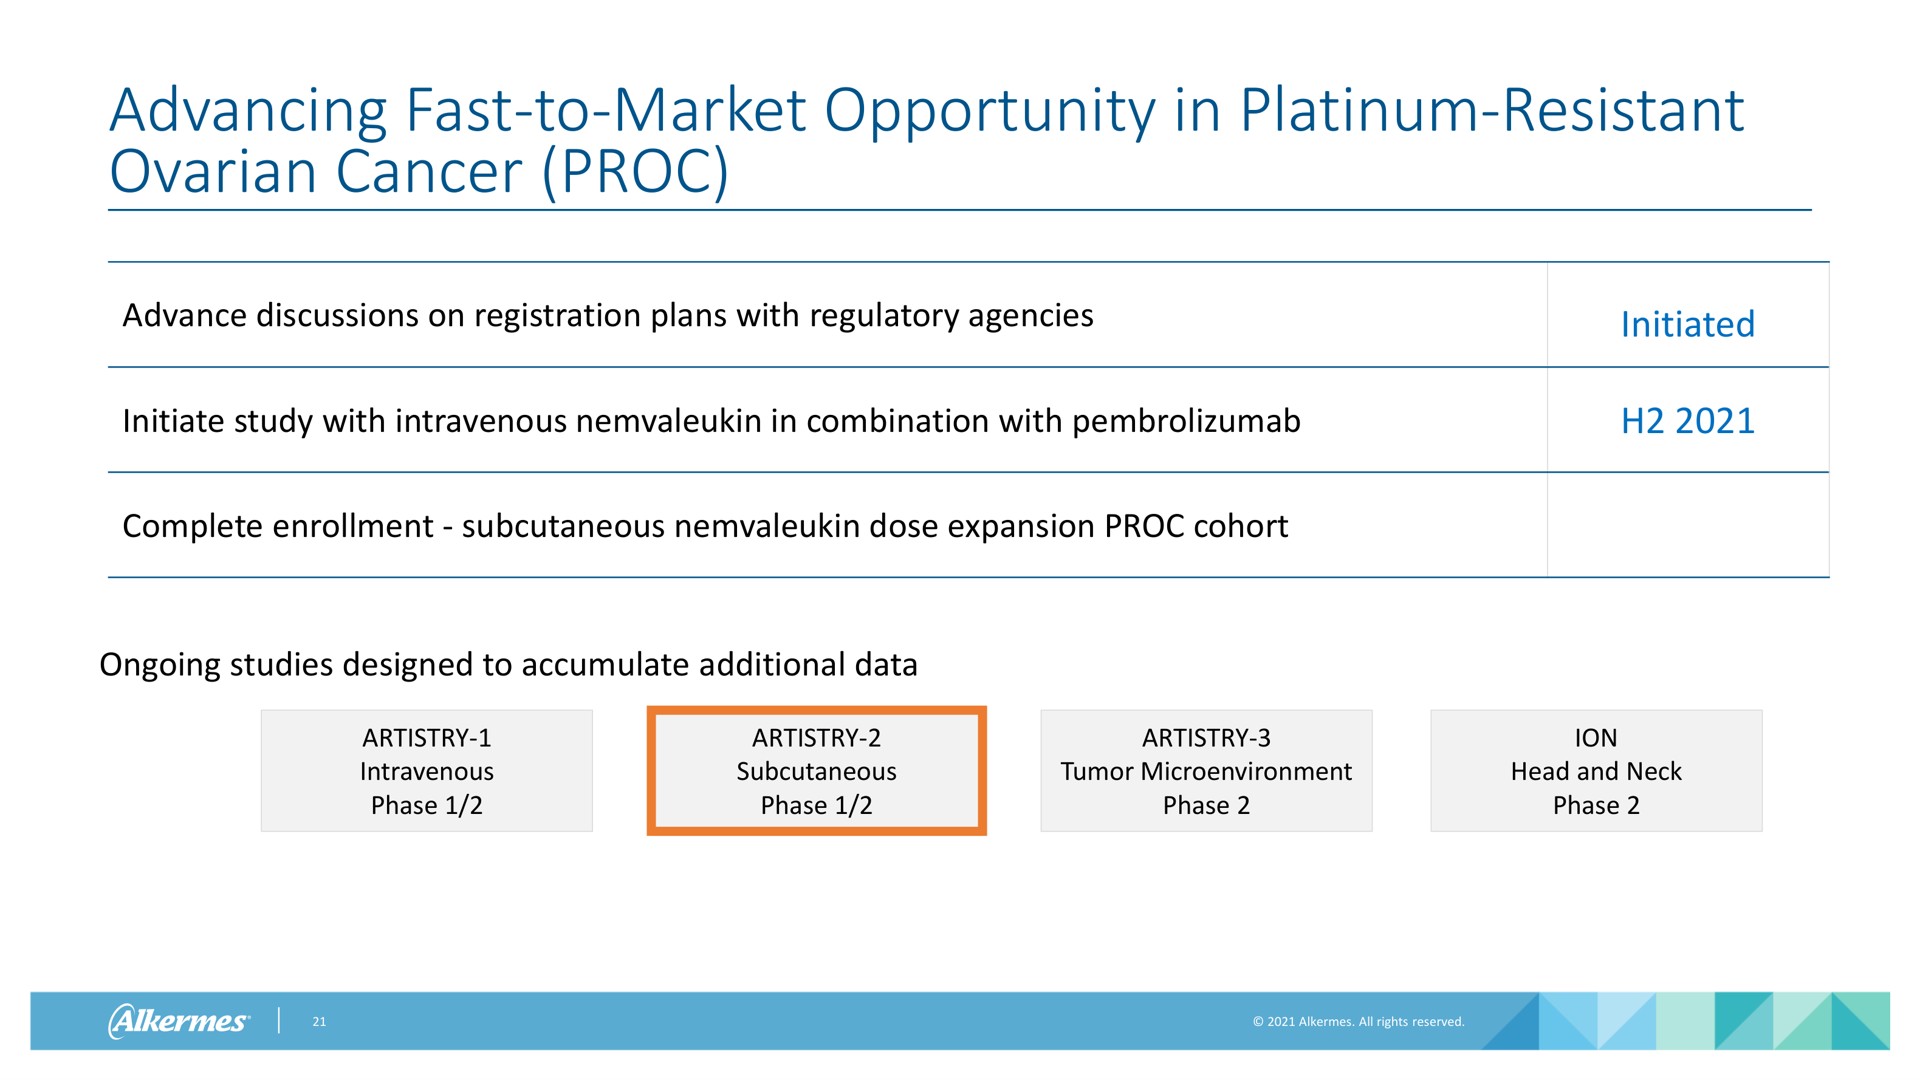 advancing fast to market opportunity in platinum resistant ovarian cancer advance discussions on registration plans with regulatory agencies initiate study with intravenous in combination with complete enrollment subcutaneous dose expansion cohort initiated ongoing studies designed to accumulate additional data artistry intravenous phase artistry subcutaneous phase artistry tumor phase ion head and neck phase | Alkermes